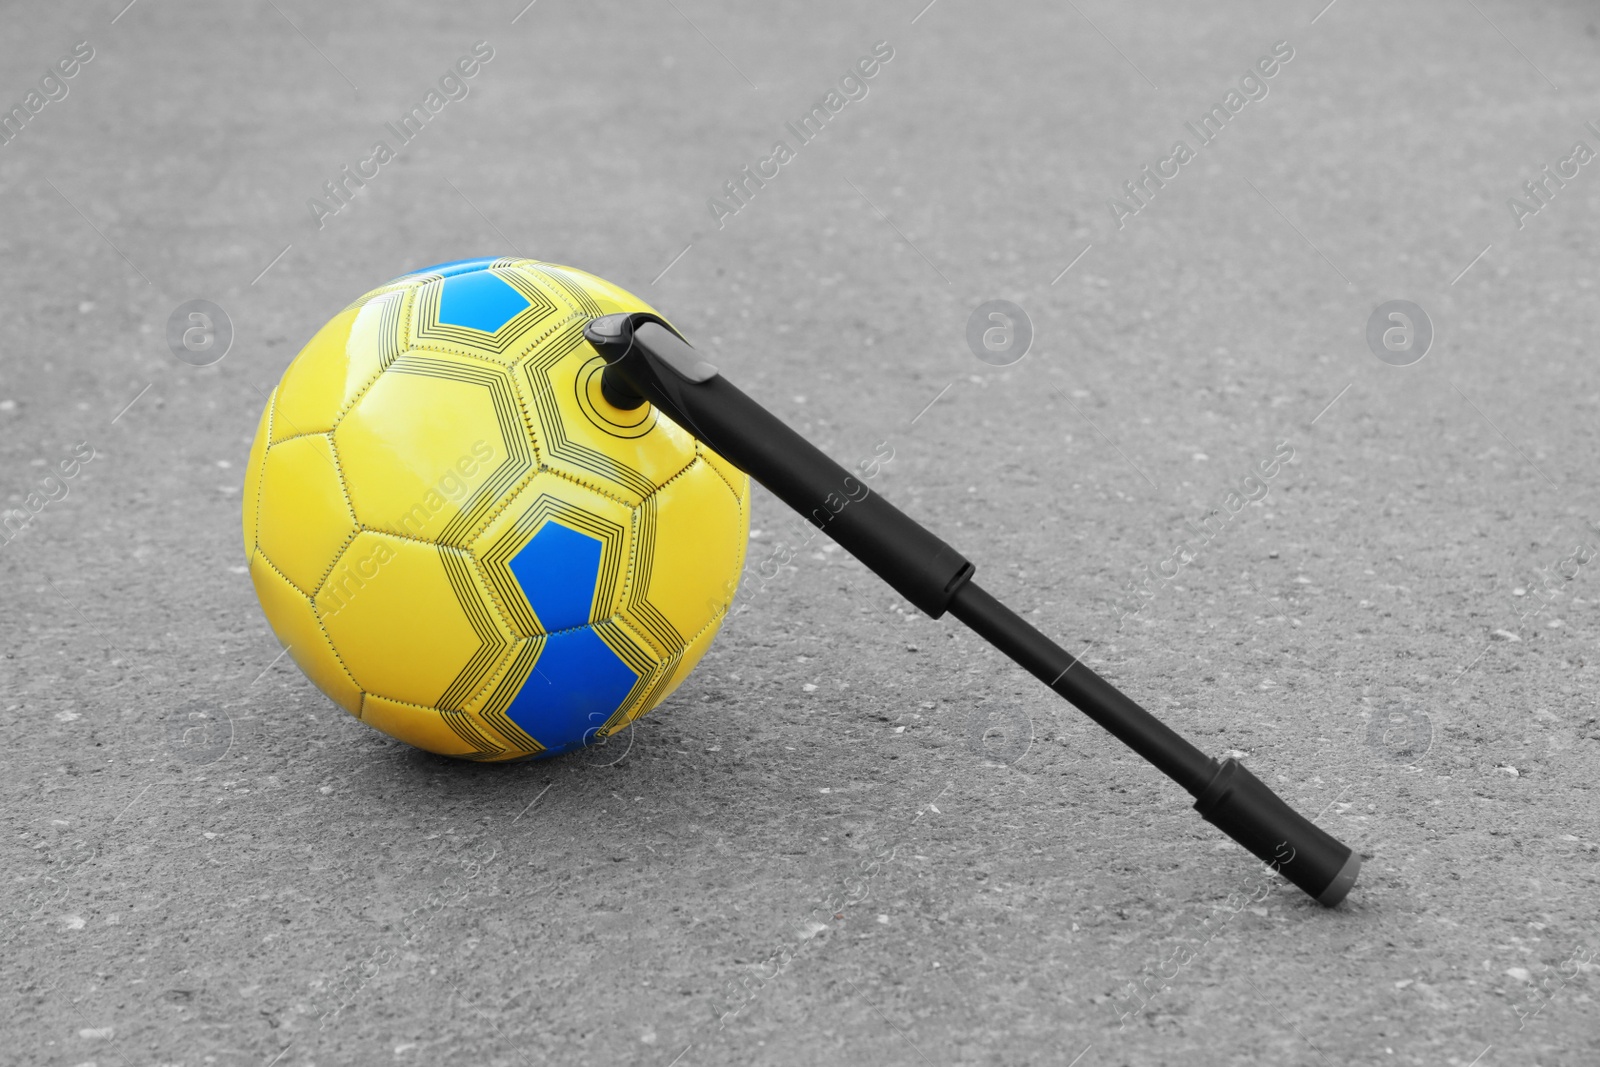 Photo of Soccer ball with manual pump inflator on asphalt